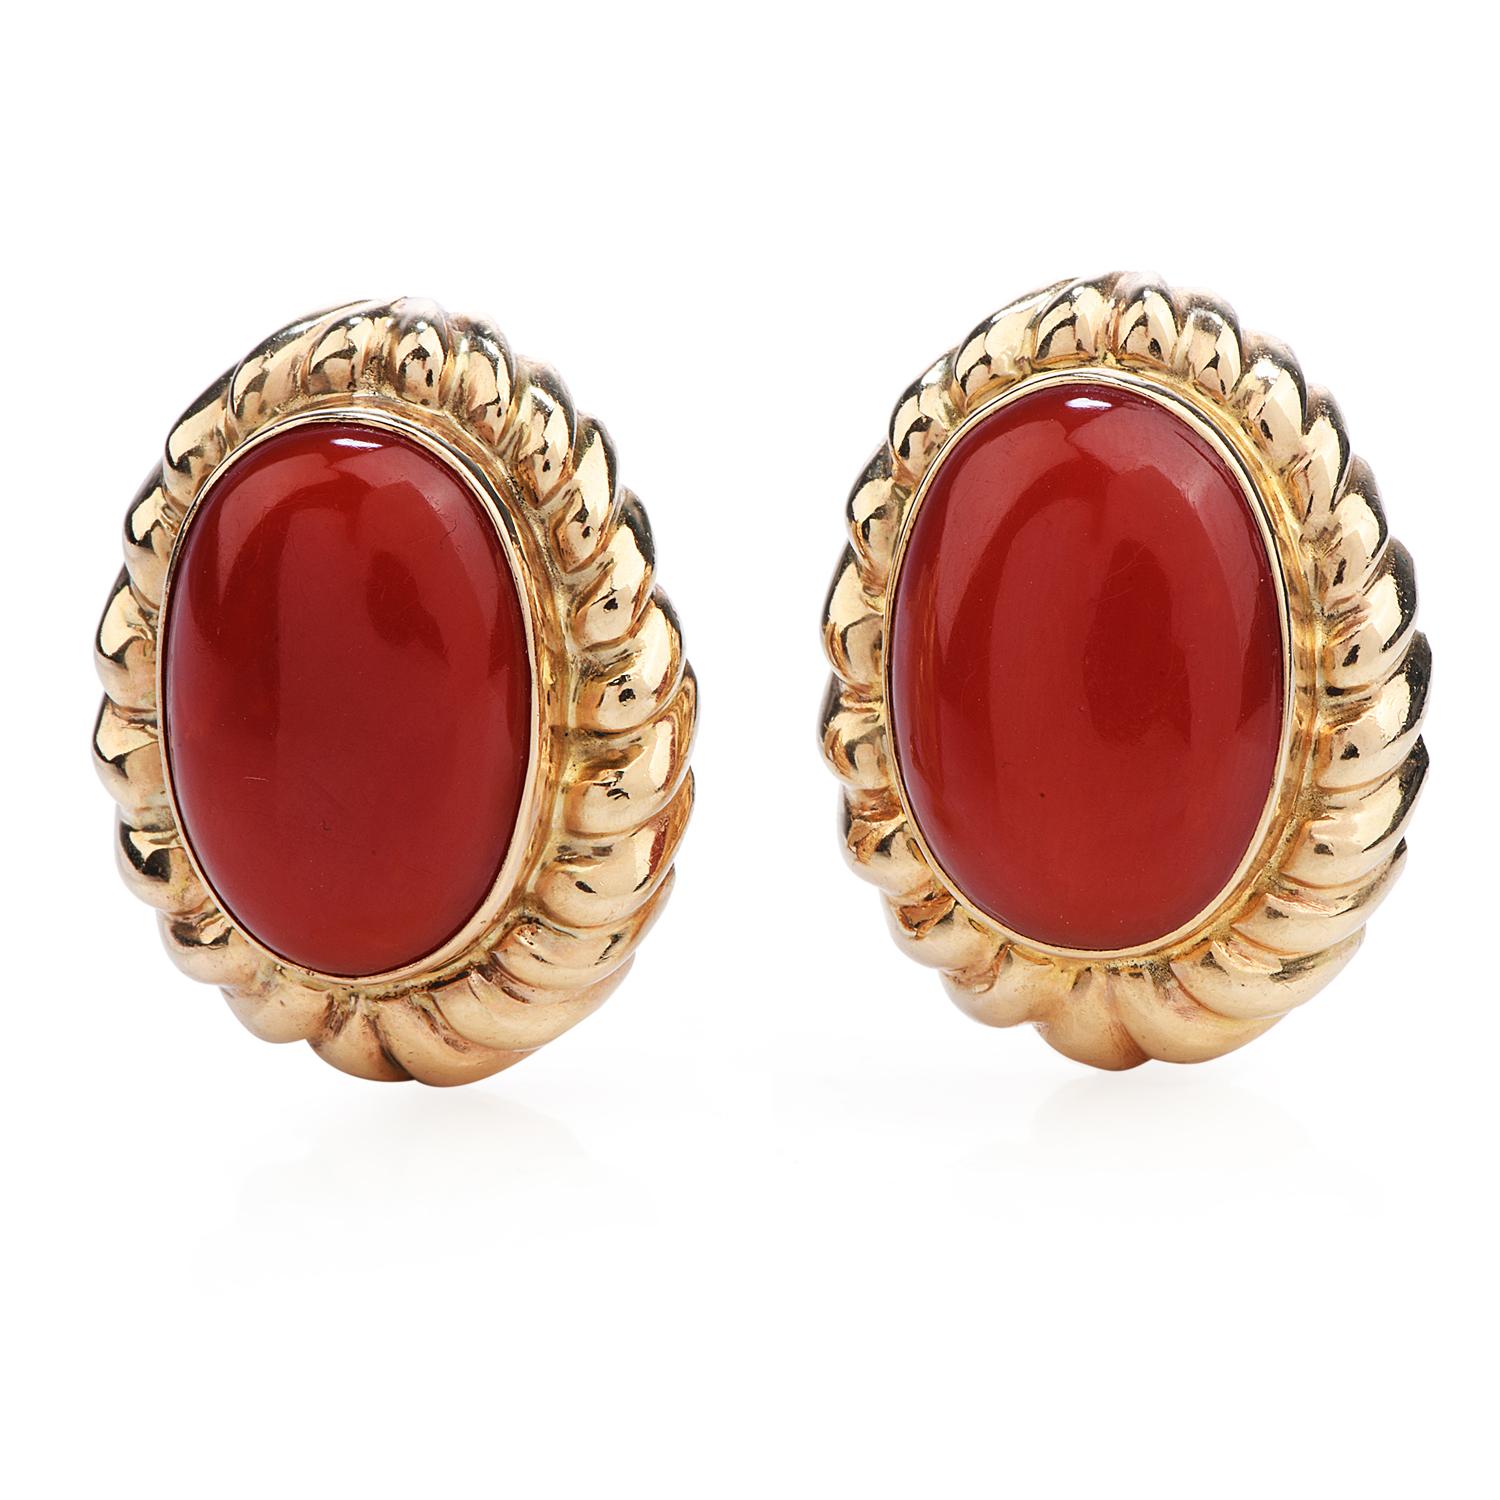 These 1980's  Natural Red coral earrings are crafted in solid 14-karat yellow gold, weighing 16.5 grams and measuring 22mm long x 17mm wide. Showcasing a pair of bezel-set natural Ox-Blood Red coral oval cabochons. Secure with clip-on back.

Remain